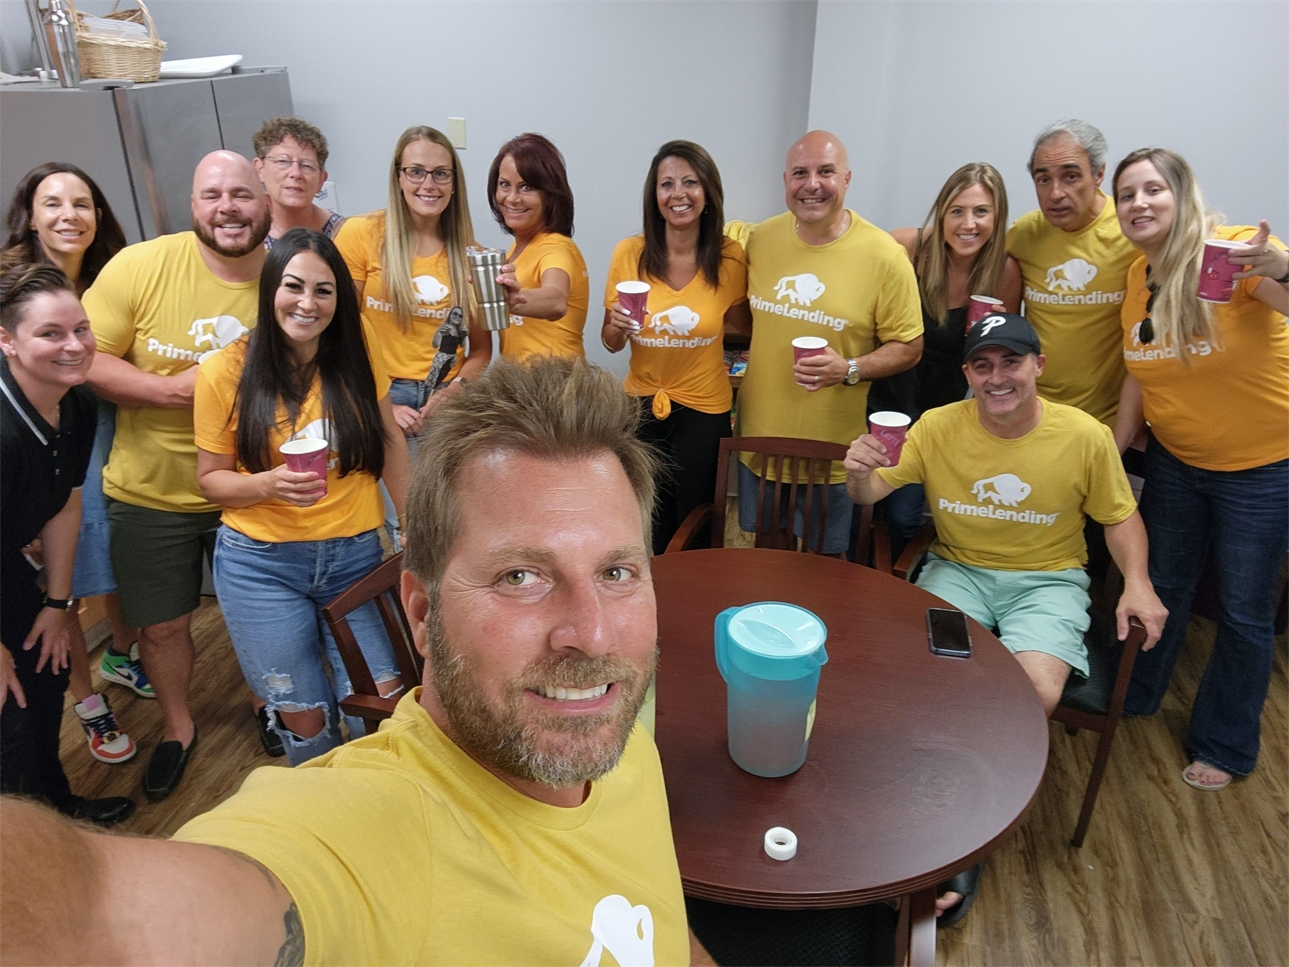 Our Monroe, NY PrimeLending Branch takes some time to gather for some lemonade and festivities during our Annual Employee Appreciation Week.